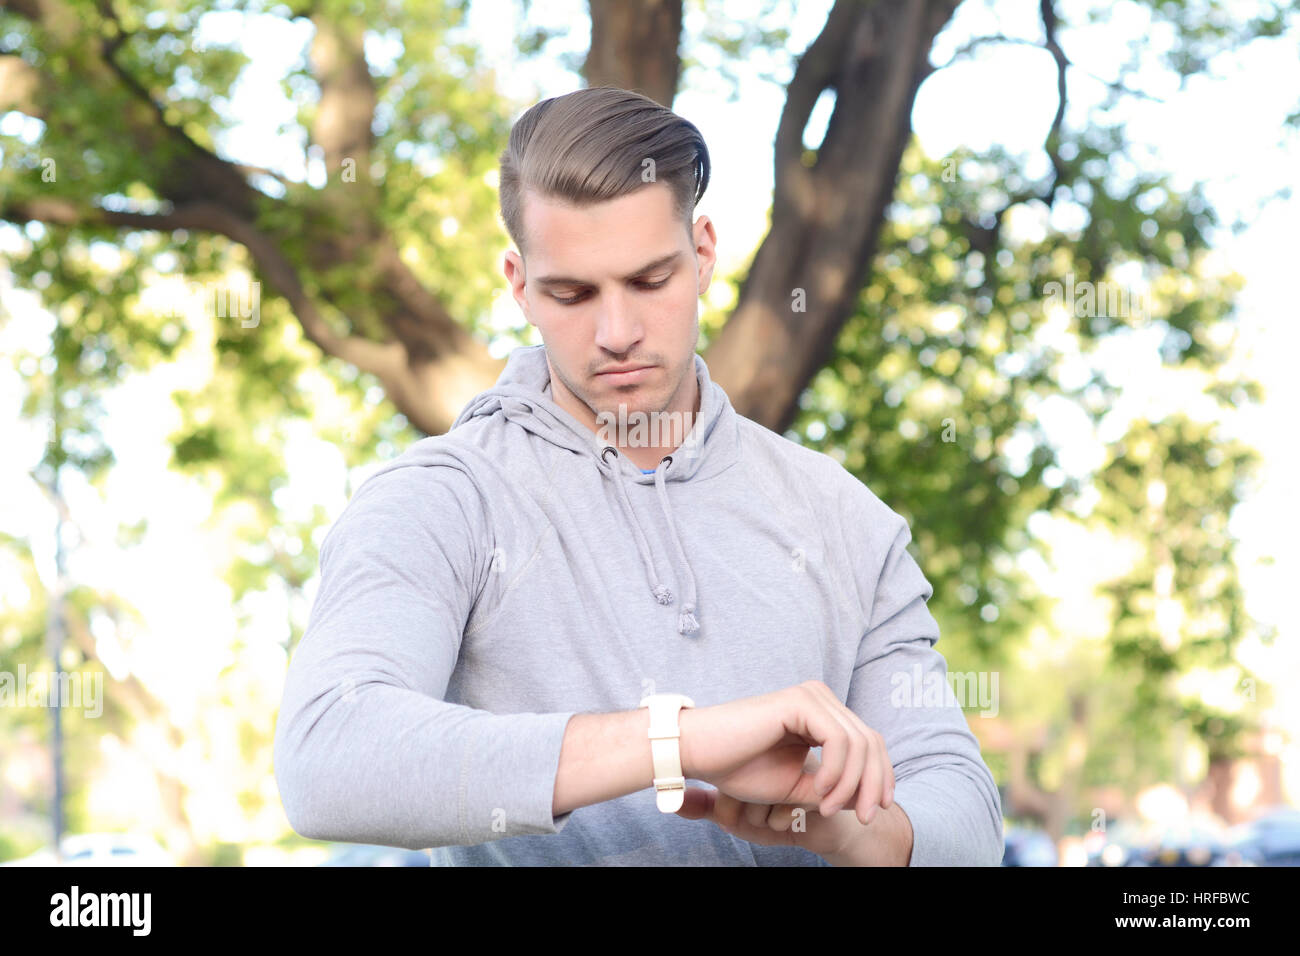 Portrait of young latin man looking at his watch at park. Outdoors. Stock Photo